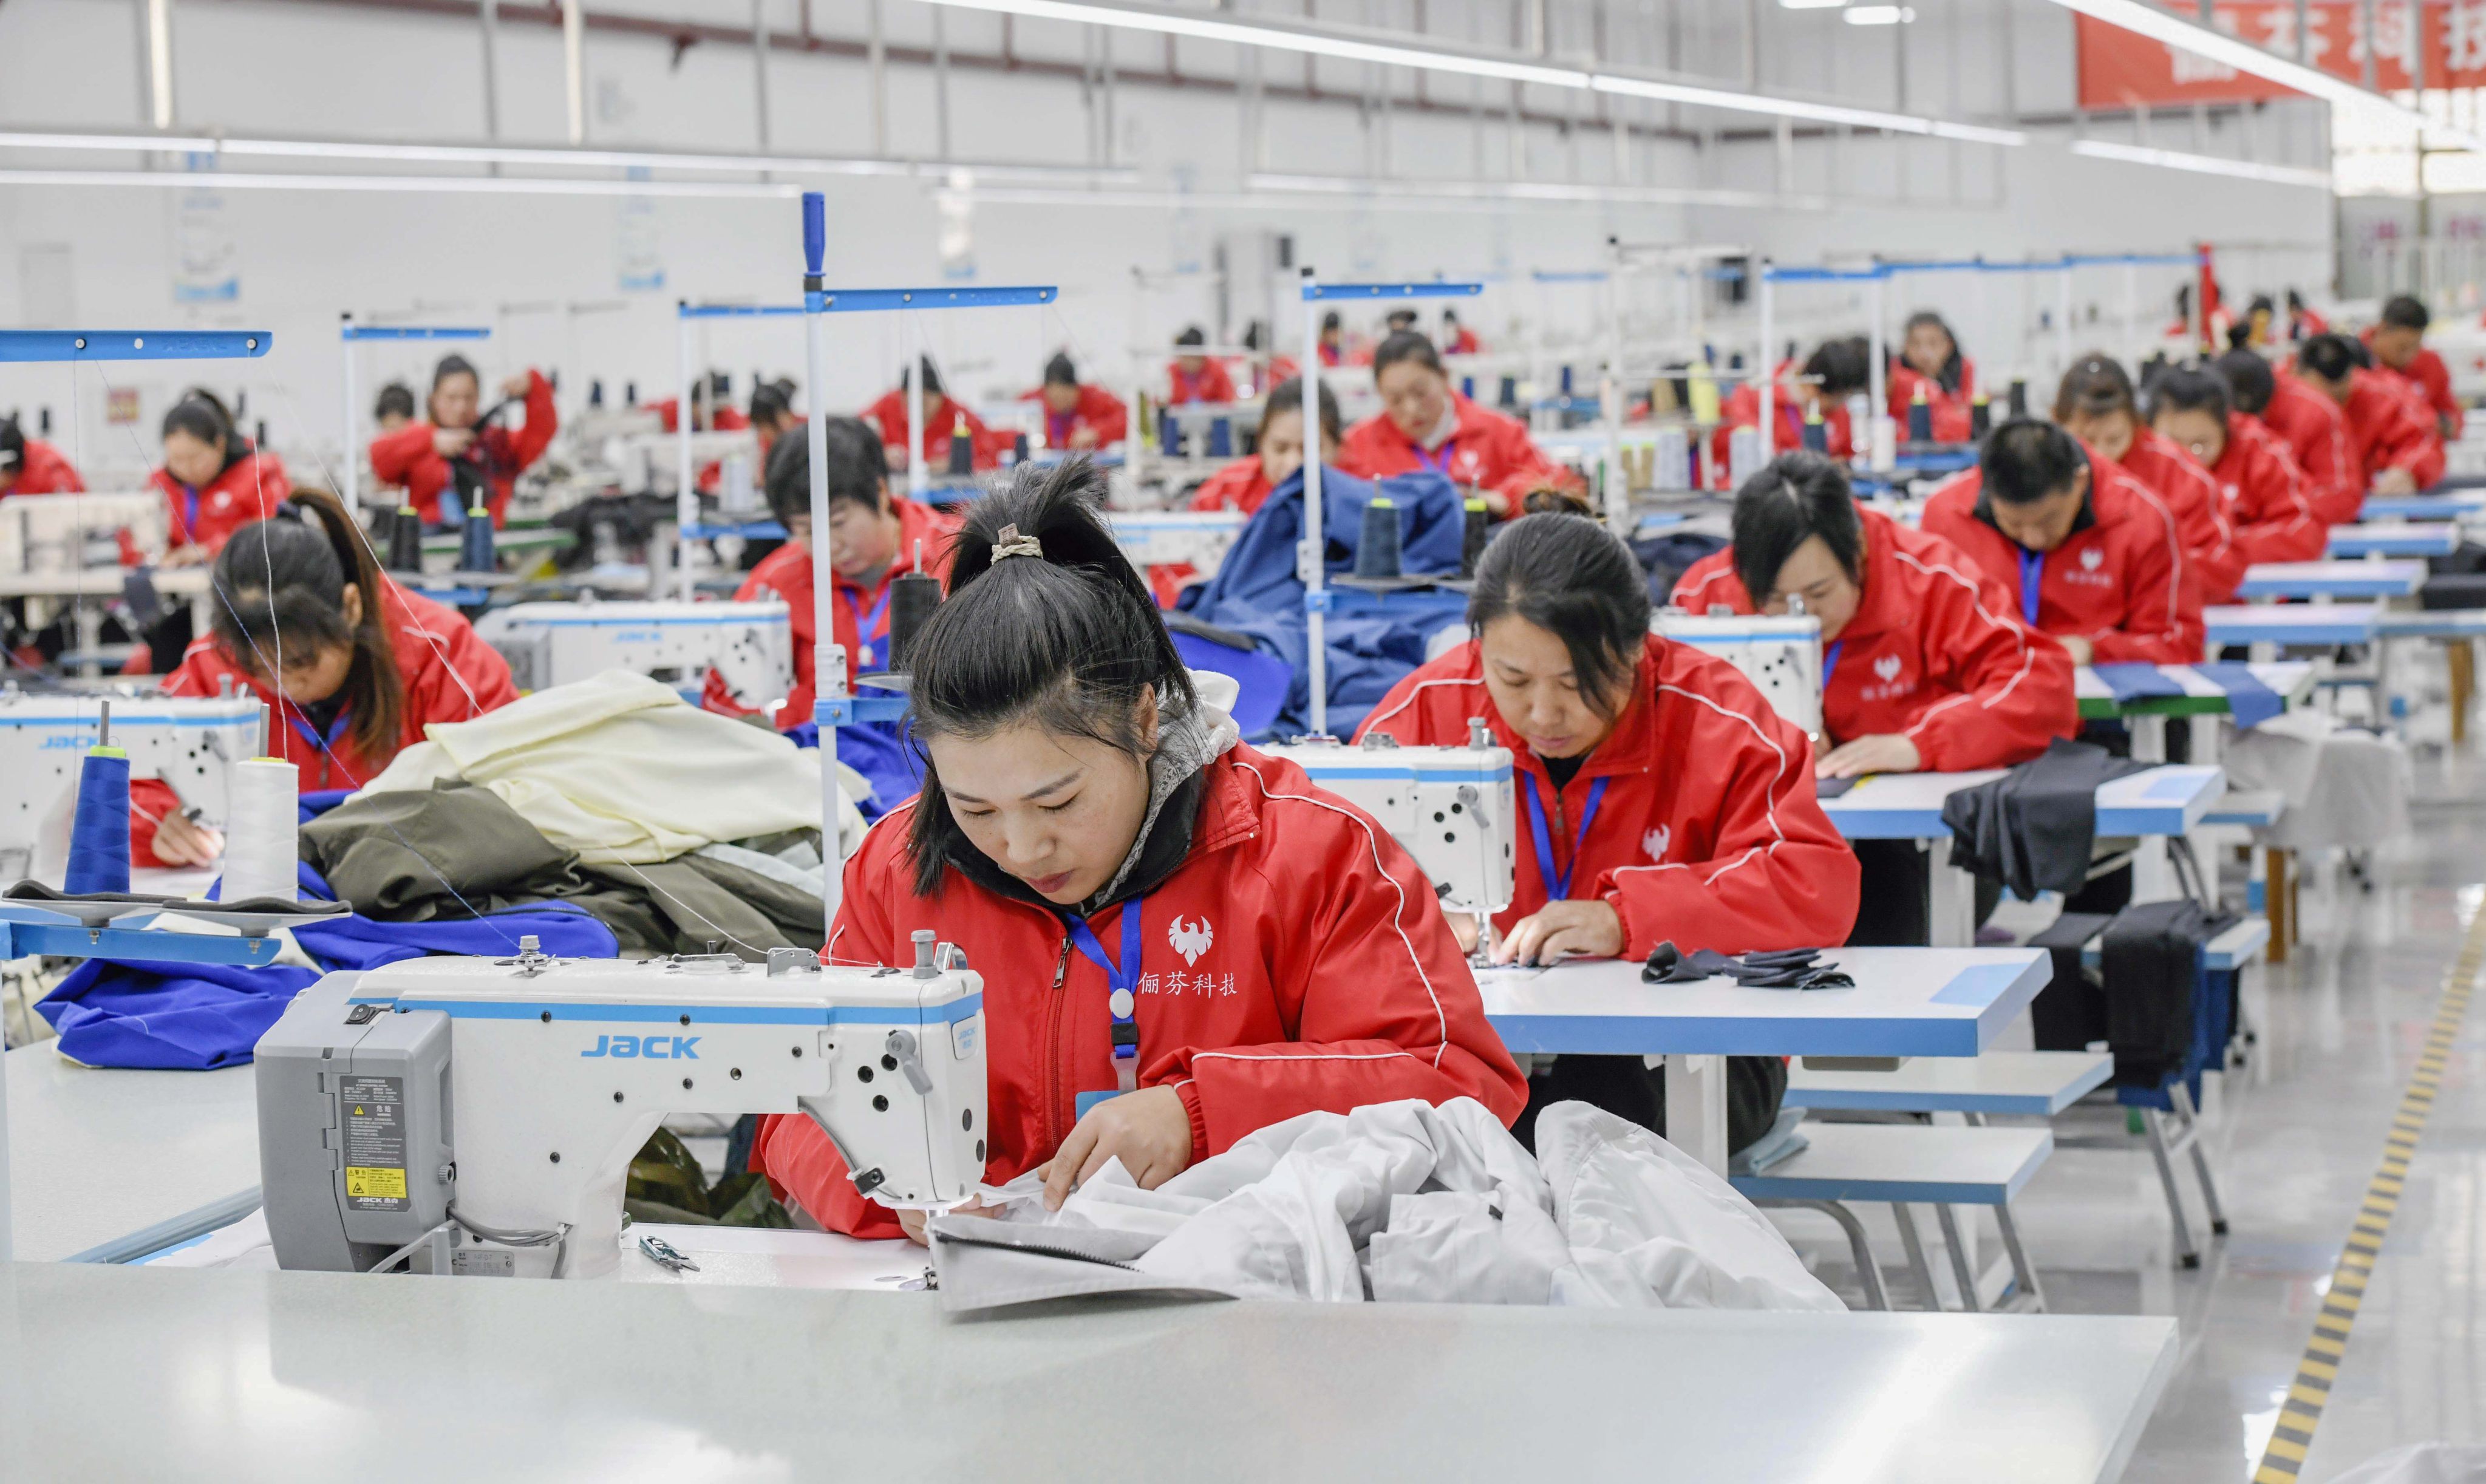 Workers sew at a workshop of a garment company in Zunhua, north China’s Hebei Province. Photo: Xinhua